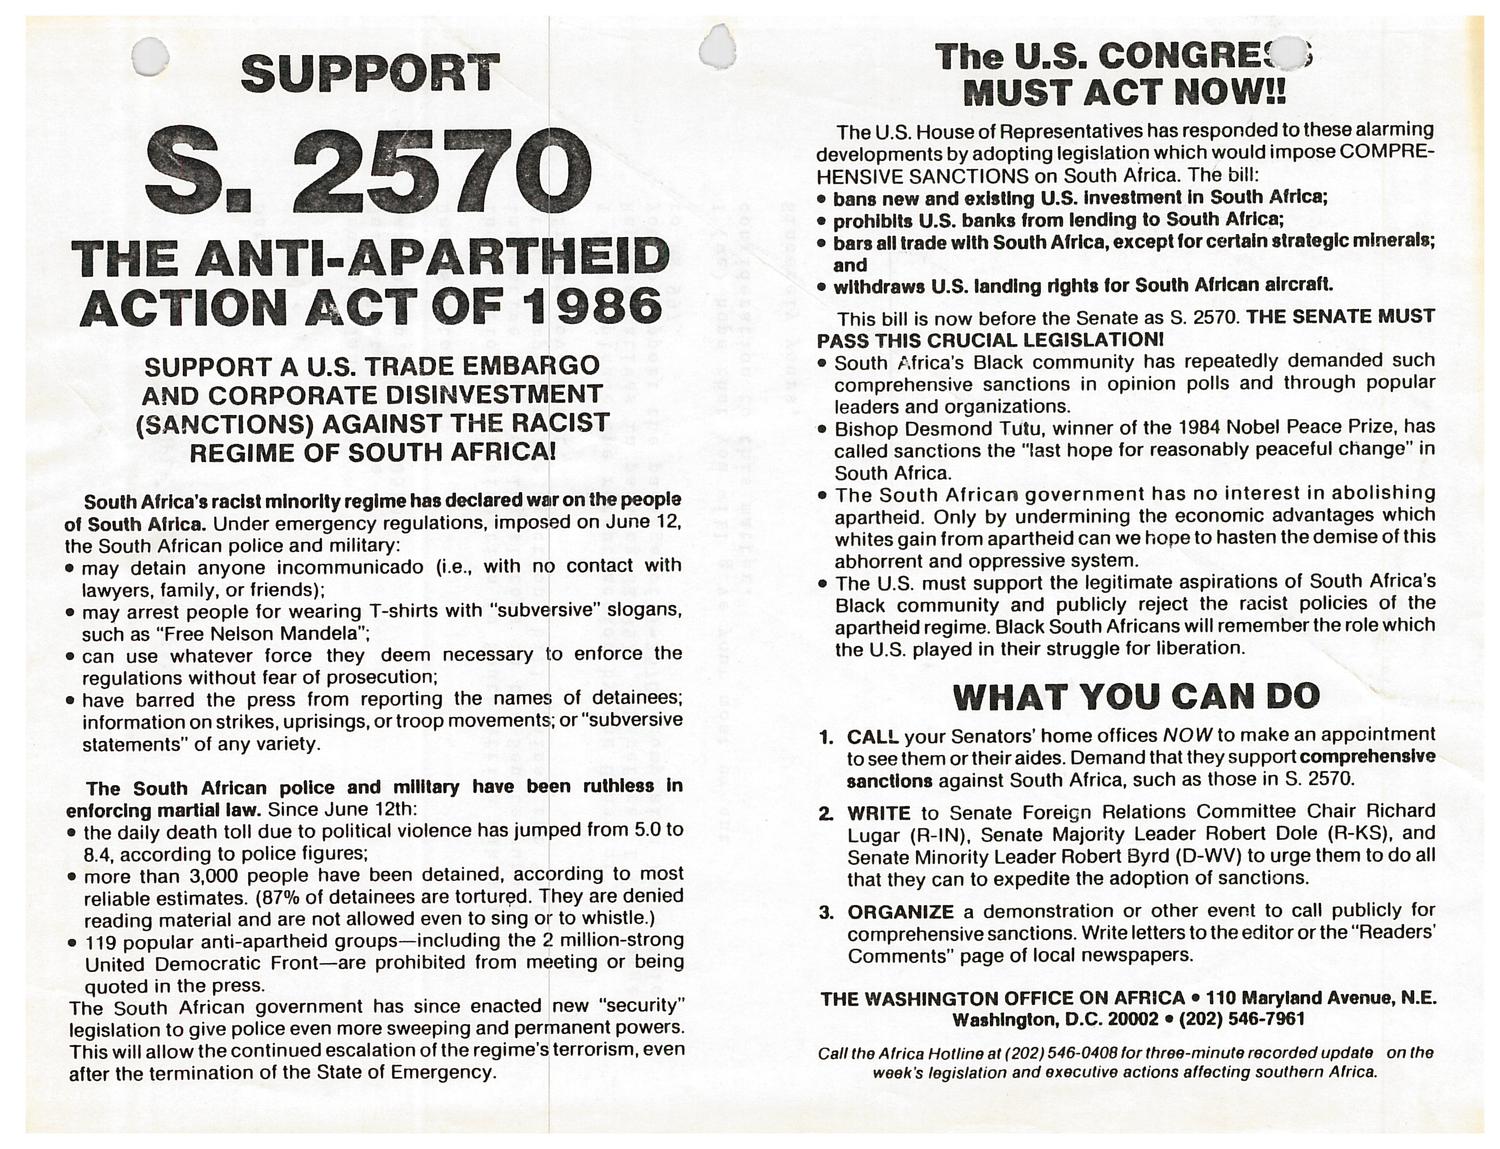 S. 2570 The Anti-Apartheid Action Act of 1986
                                                
                                                    [Sequence #]: 1 of 1
                                                